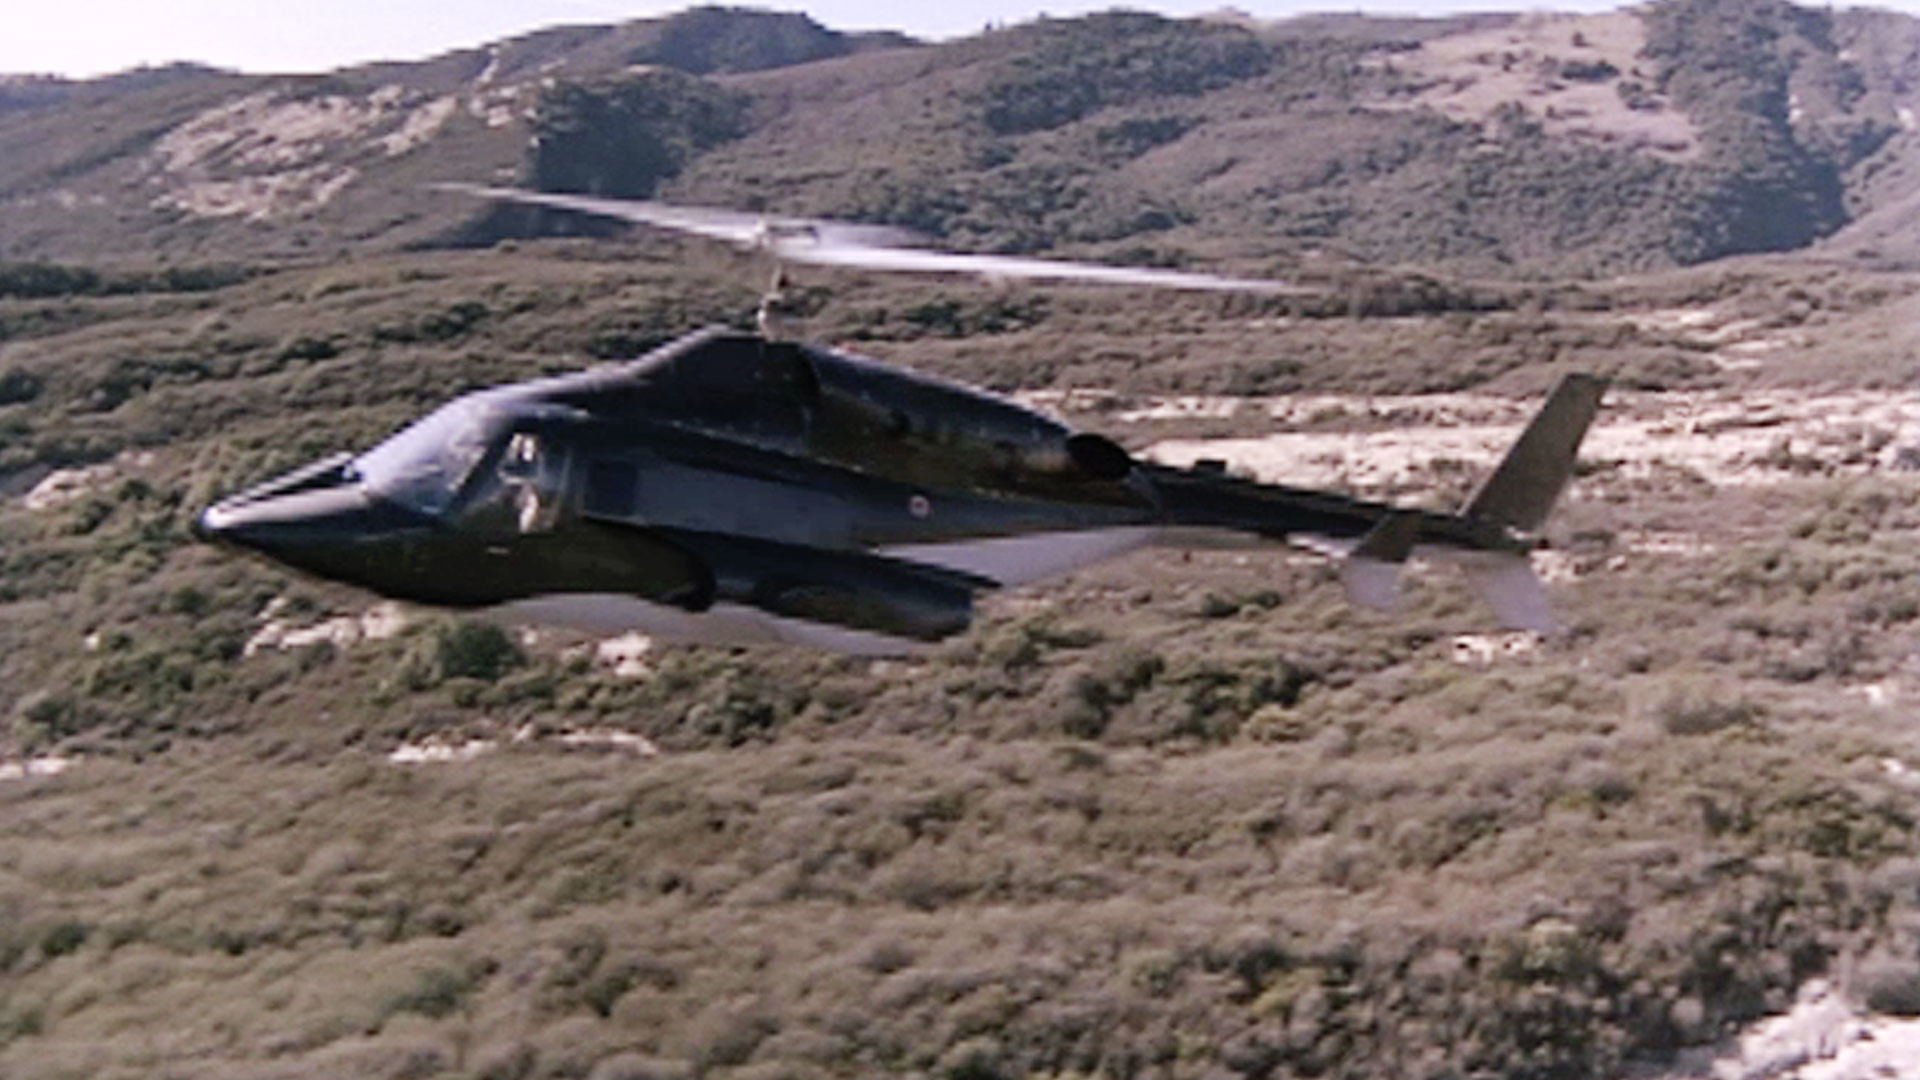 1920x1080 Airwolf Helicopter Wallpaper ...